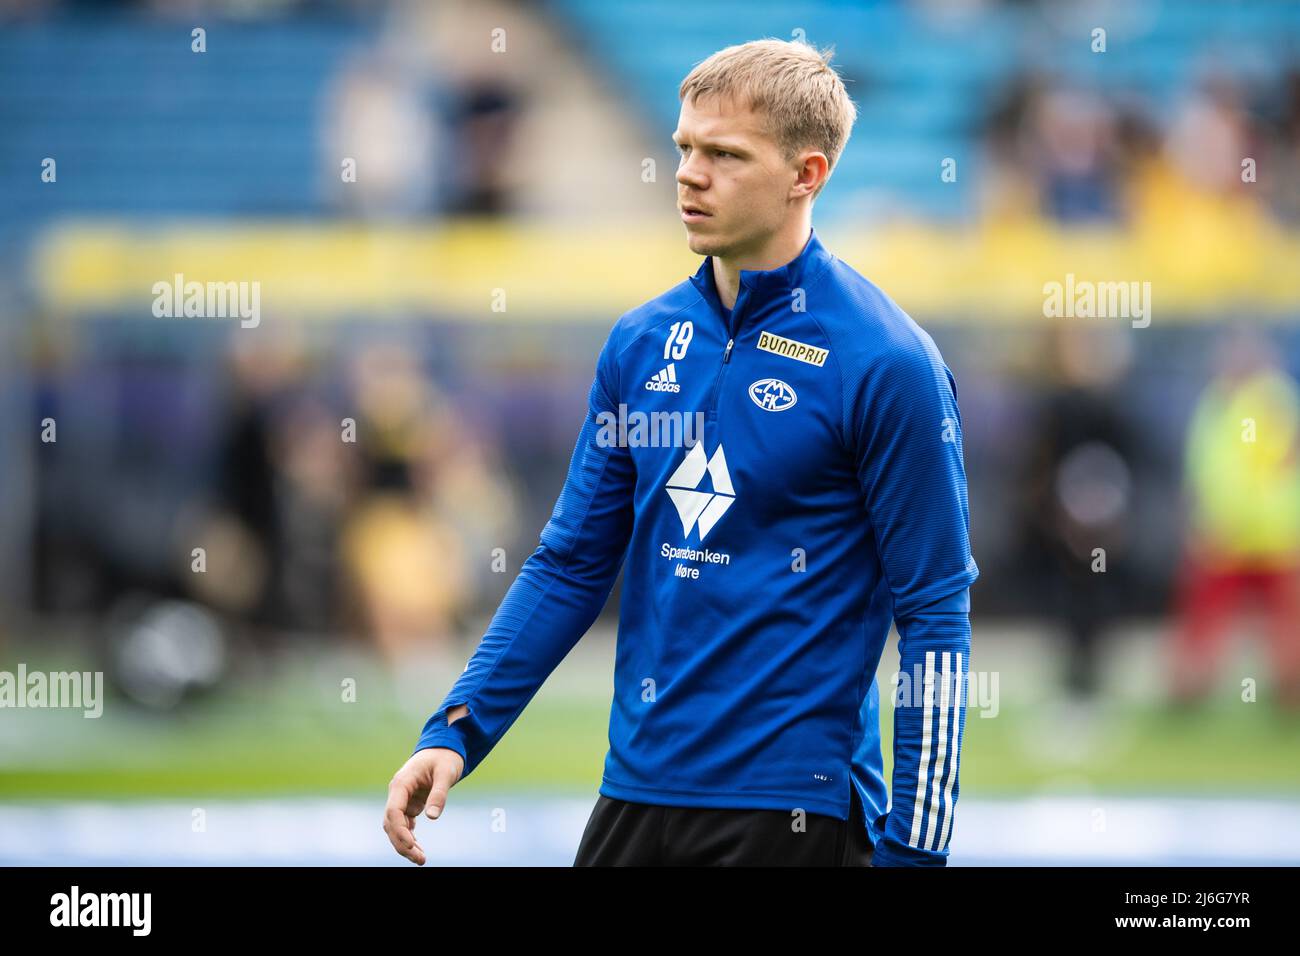 Oslo, Norway. 01st, May 2022. Eirik Haugan (19) of Molde is warming up before the Norwegian Cup final, the NM Menn final, between Bodoe/Glimt and Molde at Ullevaal Stadion in Oslo. (Photo credit: Gonzales Photo - Jan-Erik Eriksen). Credit: Gonzales Photo/Alamy Live News Stock Photo